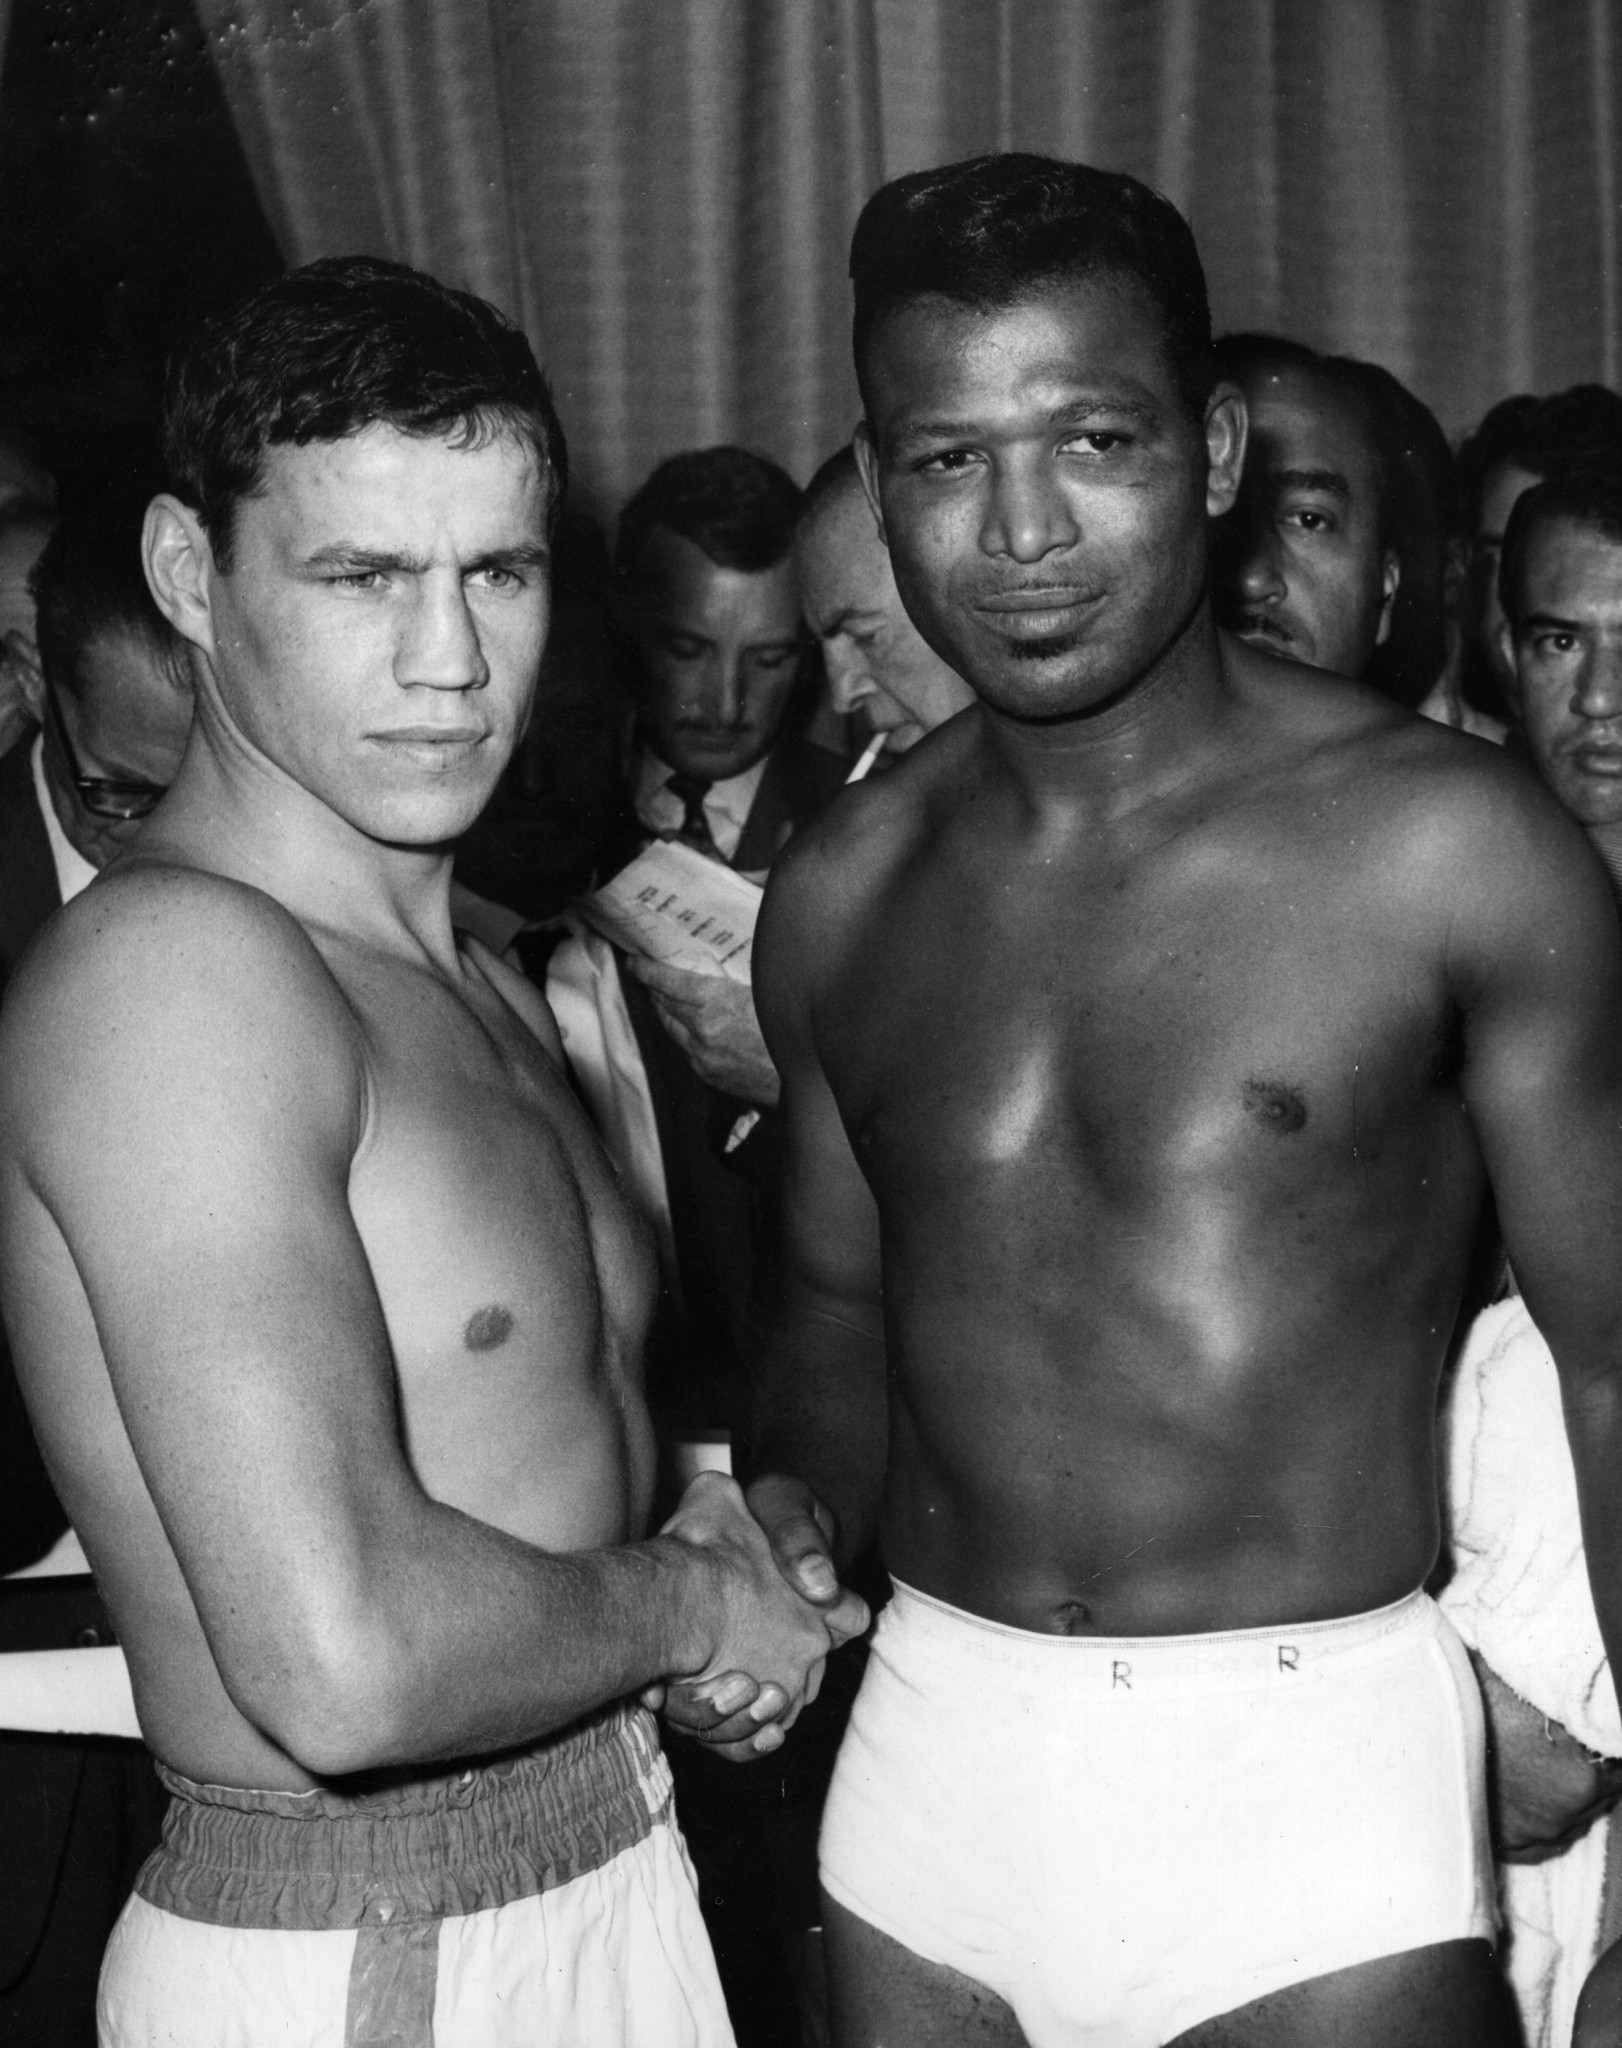 British boxer Terry Downes, left, and Sugar Ray Robinson, the former world middleweight champion, shaking hands at the weigh-in before their fight at Wembley, London ©Getty Images